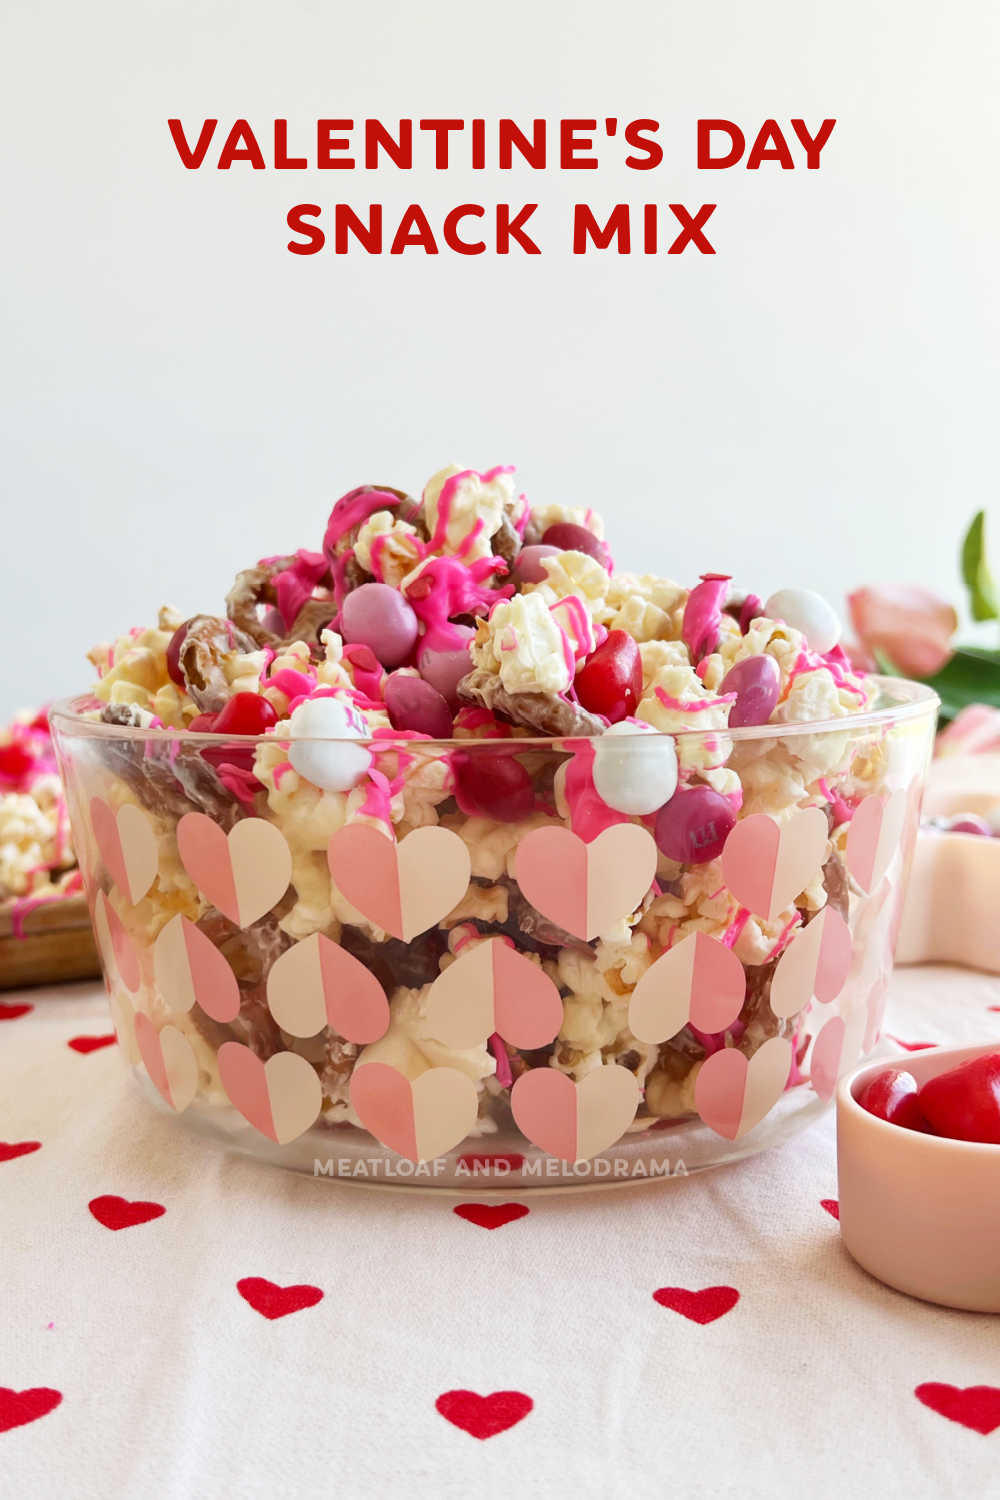 Valentine's Day Snack Mix is an easy recipe made with popcorn, pretzels, Valentine candy and white chocolate. A salty and sweet treat everyone will love! via @meamel